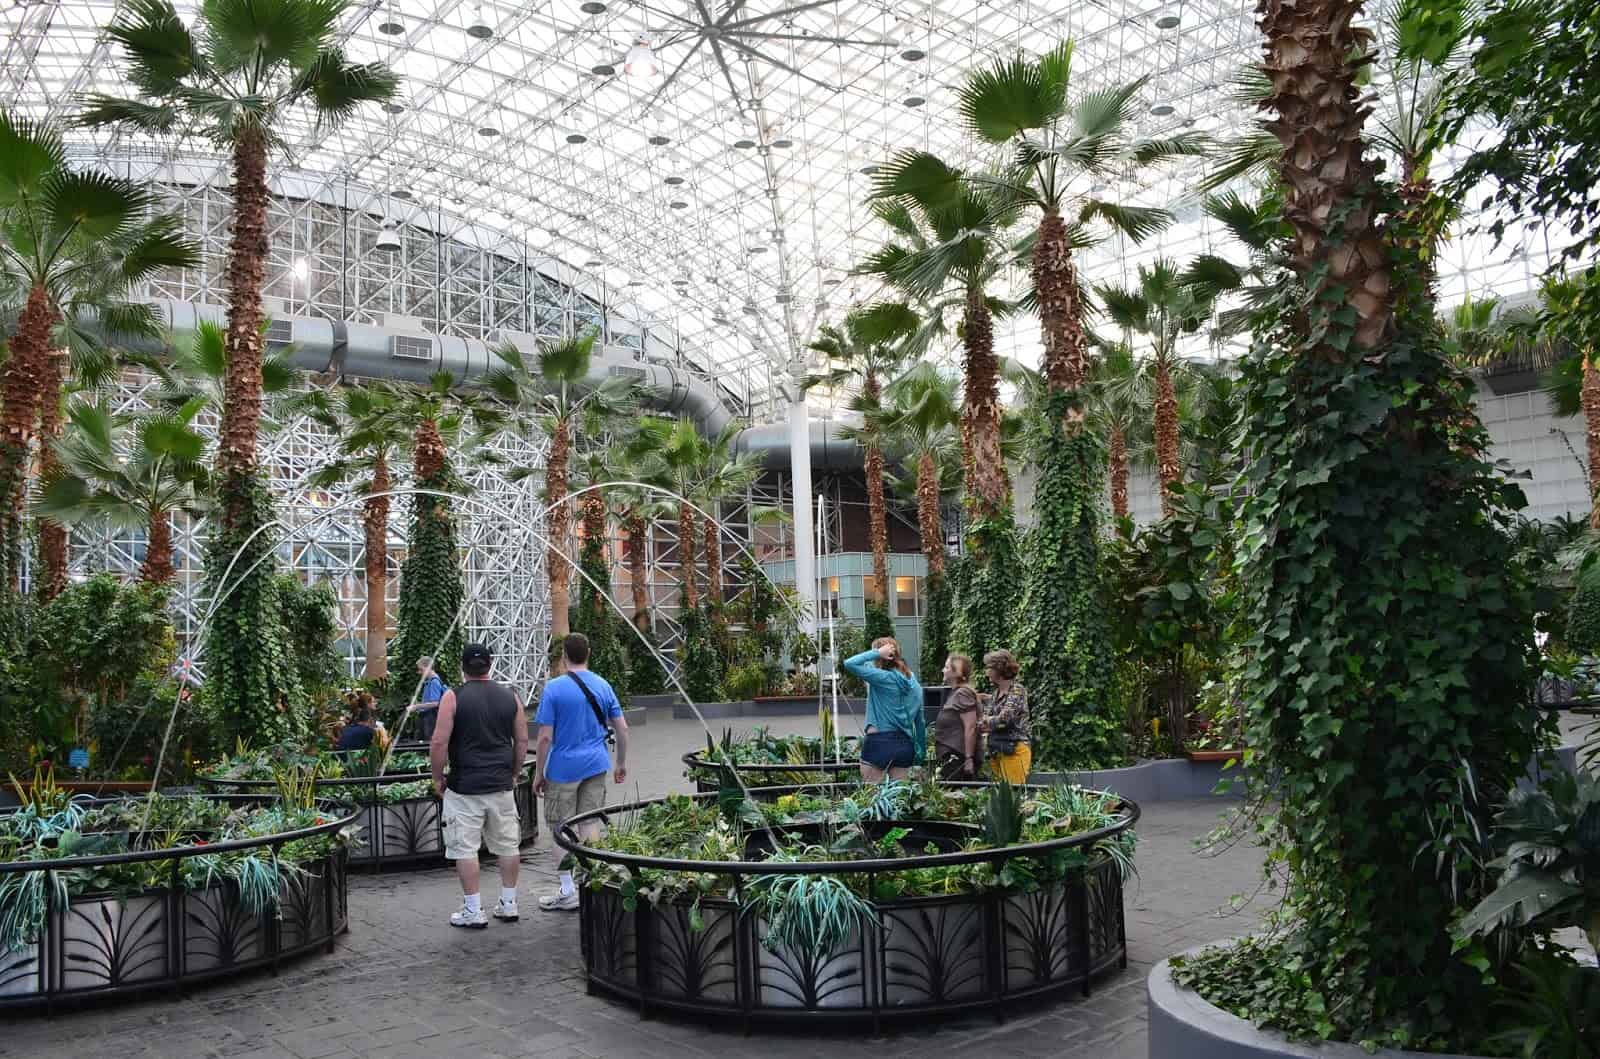 Crystal Gardens at Navy Pier in Chicago, Illinois